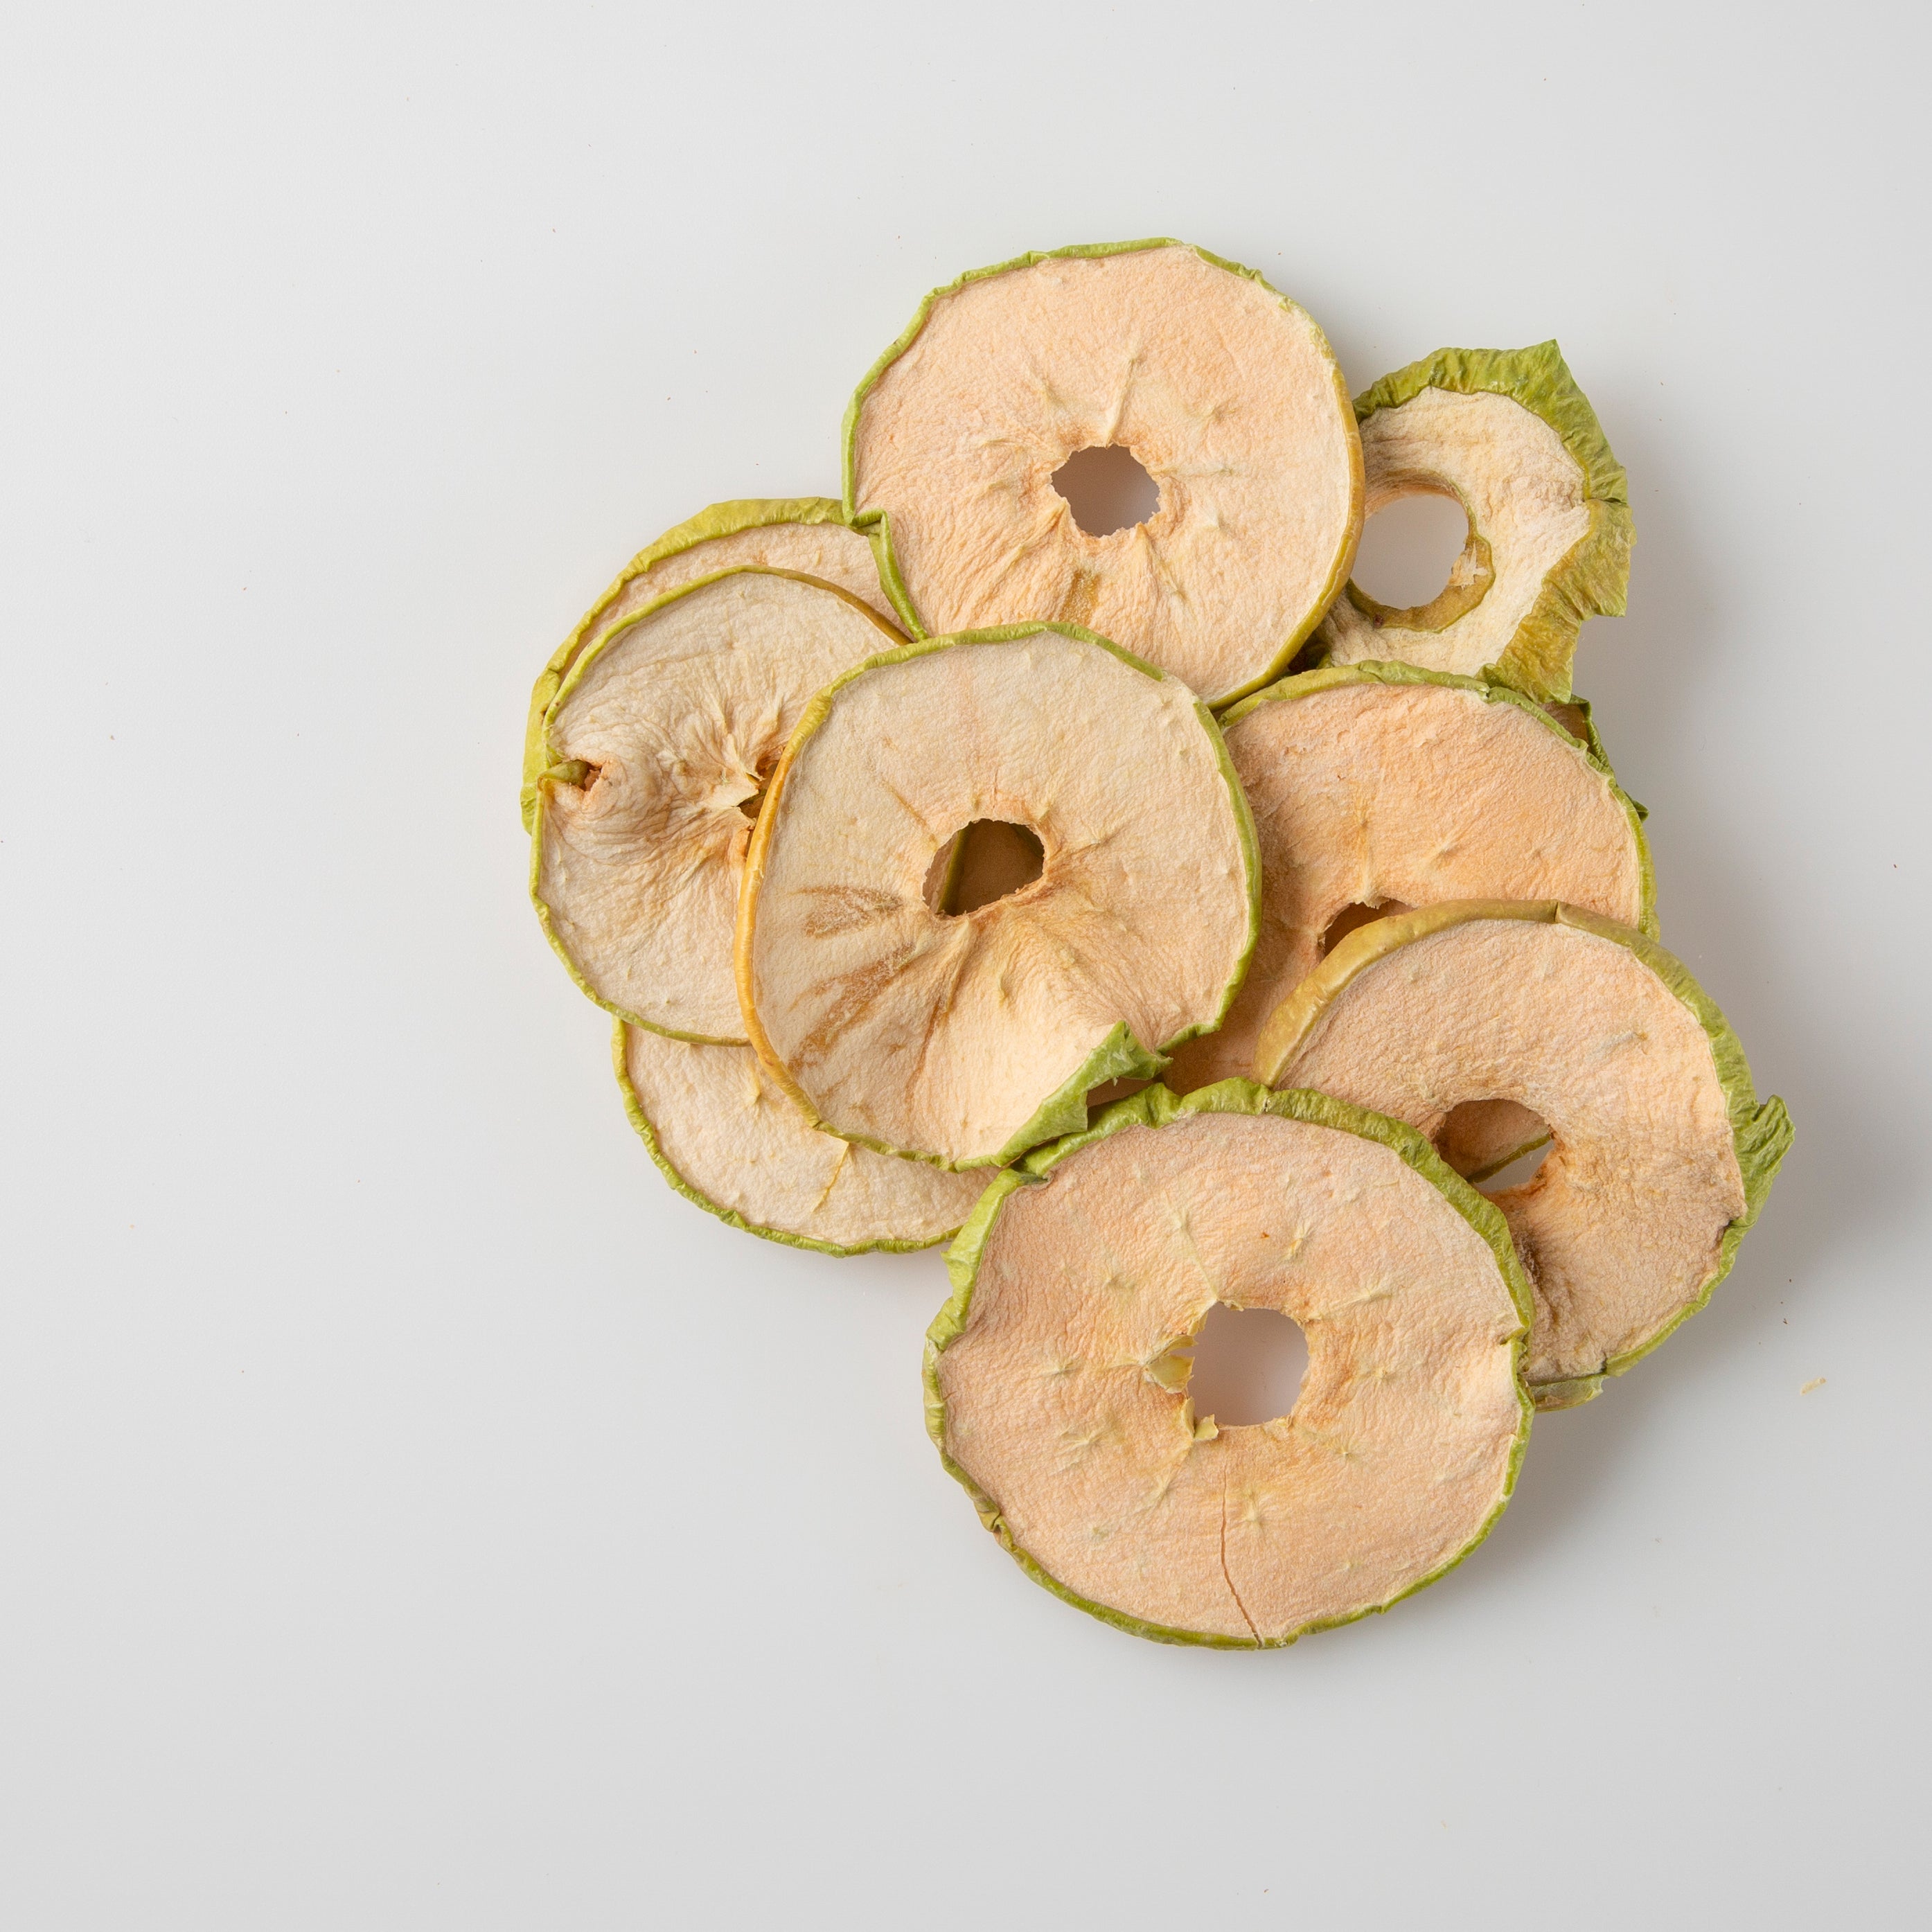 Dried Apple Rings (Dried Fruits) Image 3 - Naked Foods